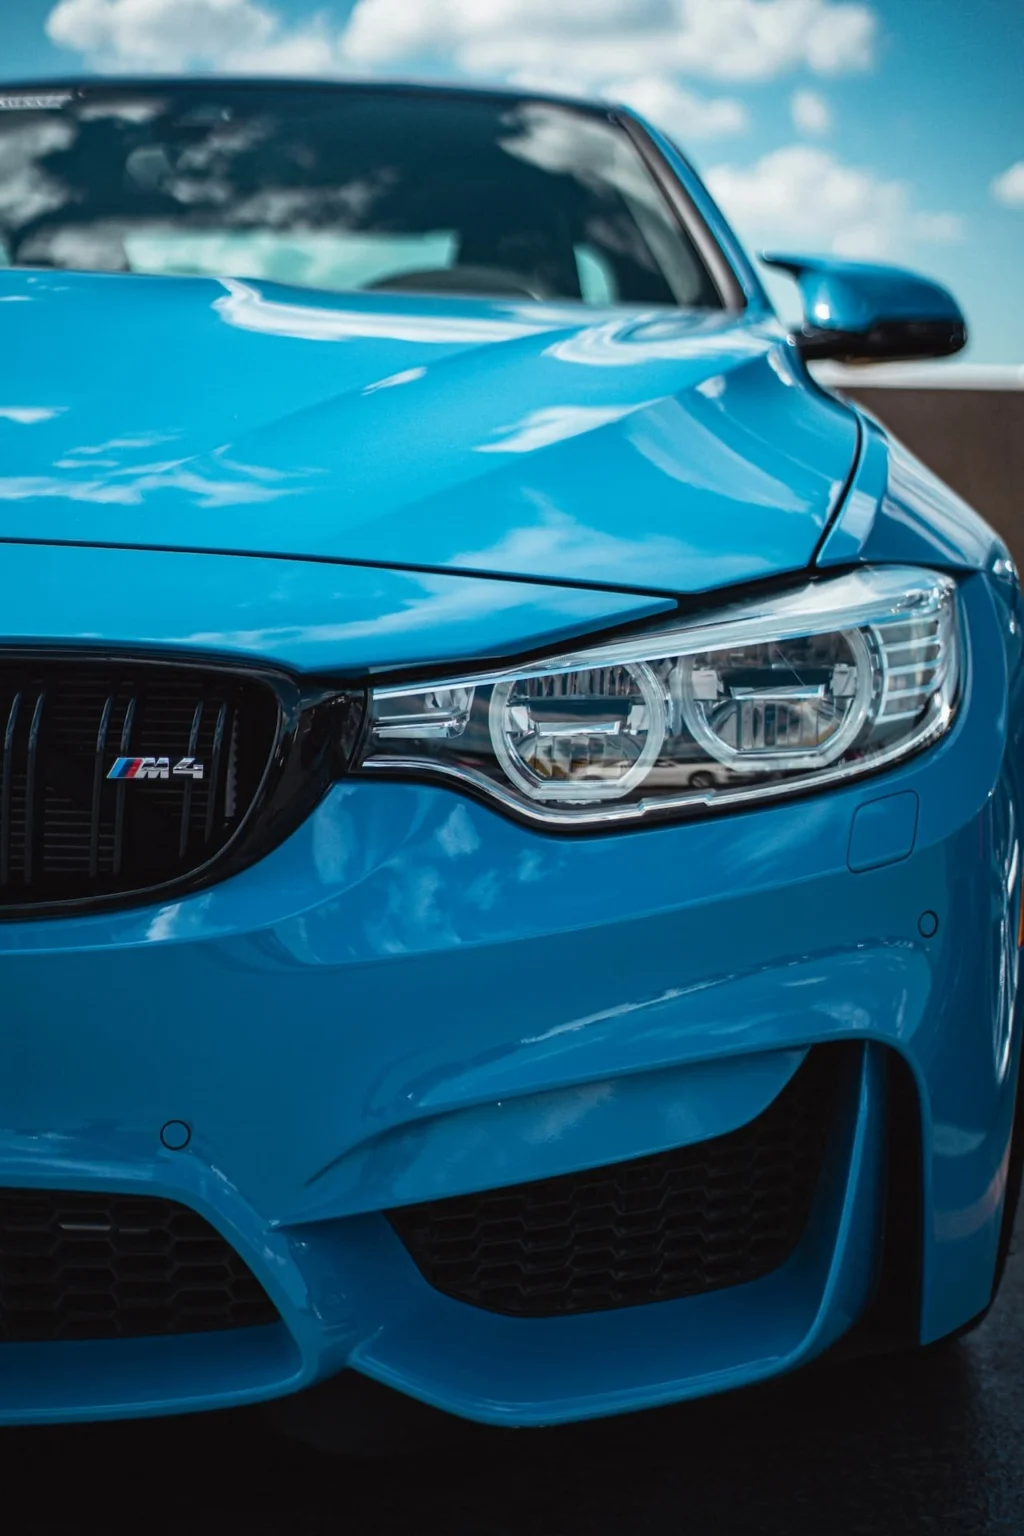 Close-up front shot of a turquoise BMW M4